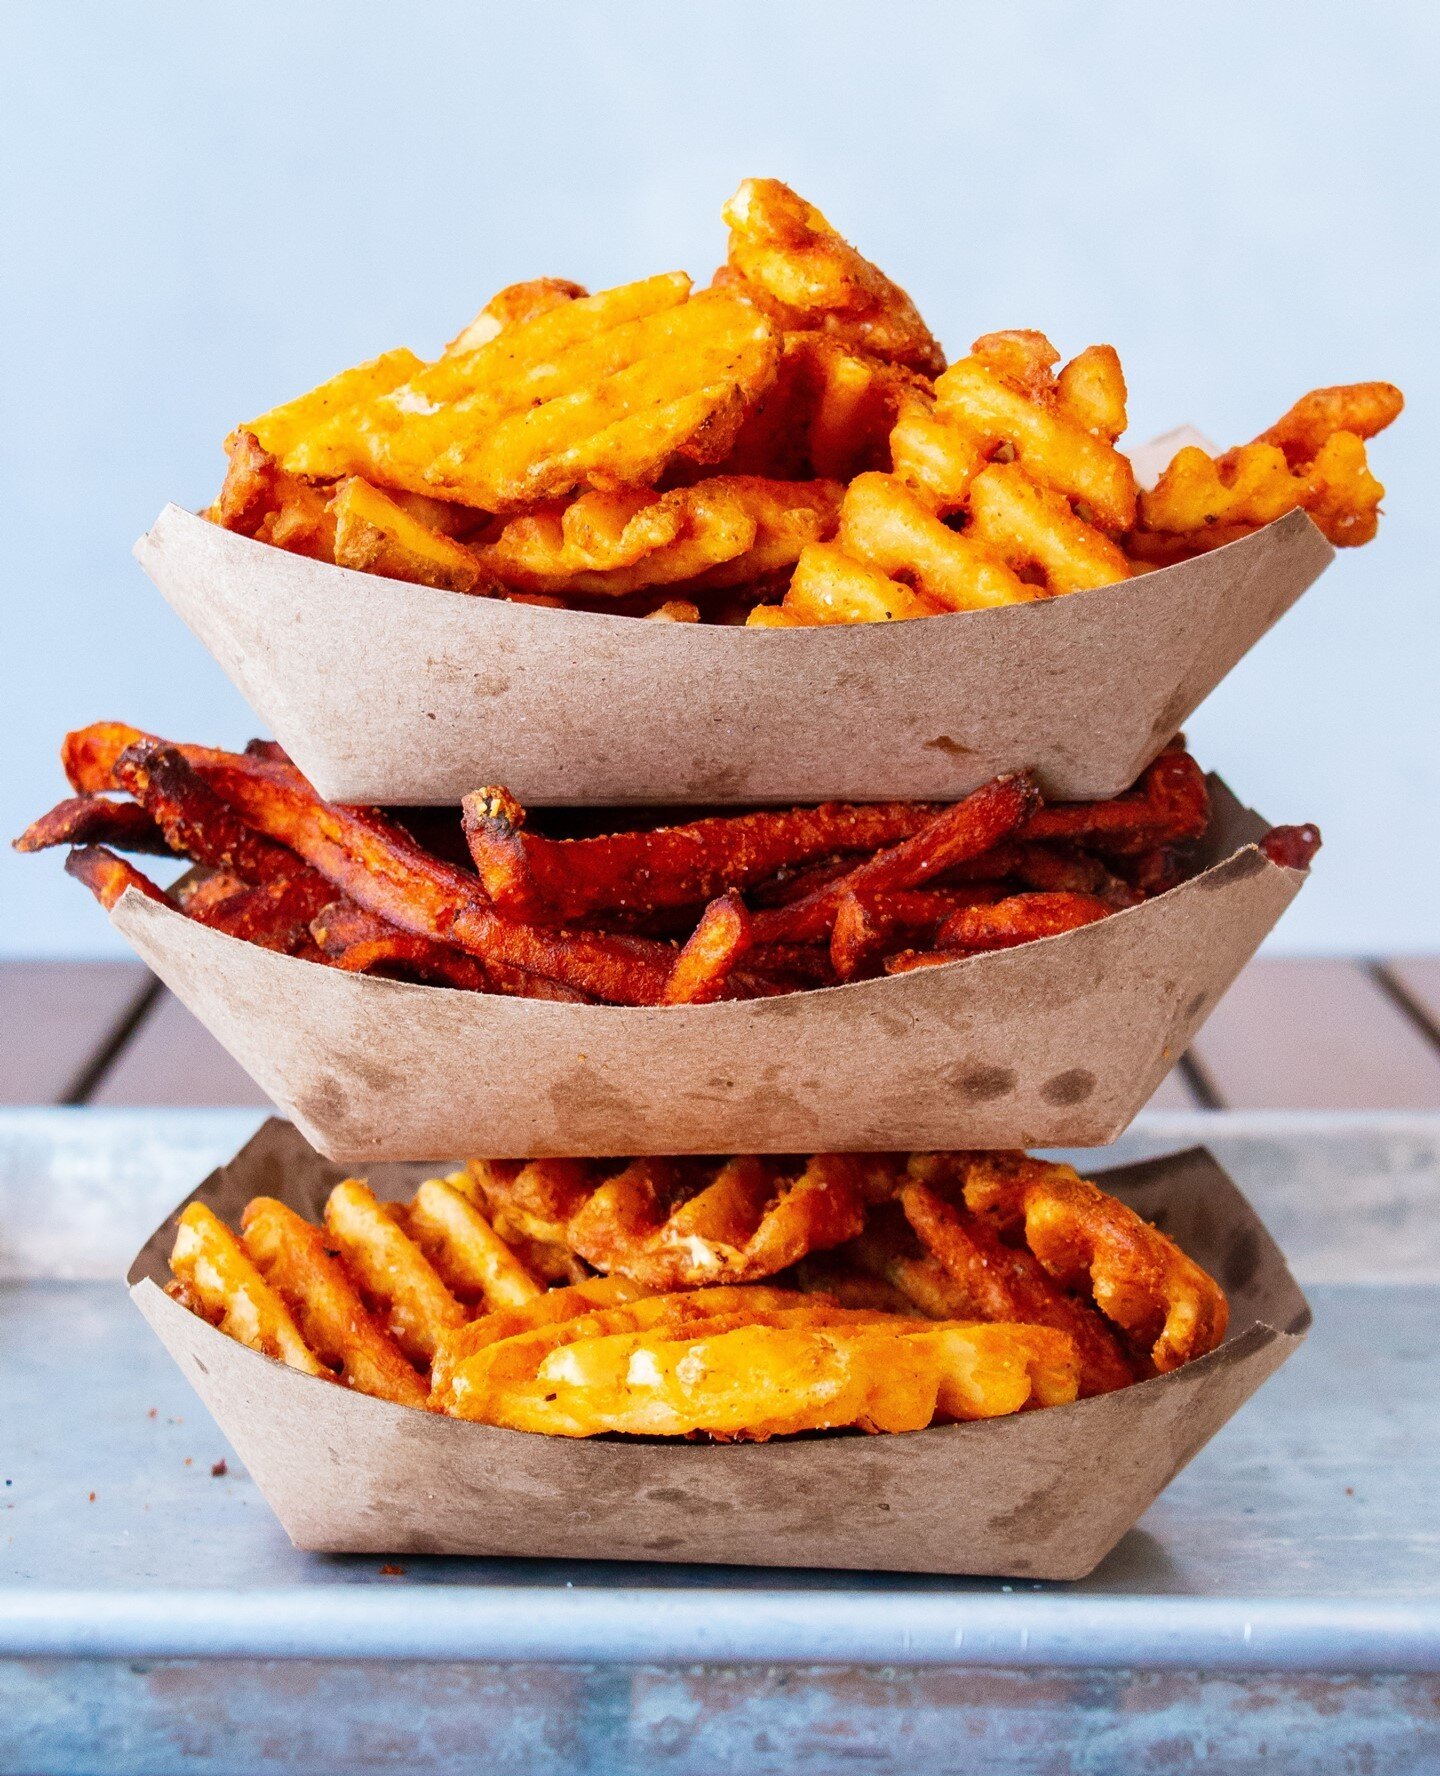 Waffle or sweet potato?? Which fry would you pick...?⁠
⁠
💚 Order Heritage Eats for delivery or pick up!  Go to www.heritageeats.com and hit 'Order Online,' or find us on DoorDash or UberEats!⁠
⁠⁠
🦞 Experience our one-of-a-kind, authentic southern l